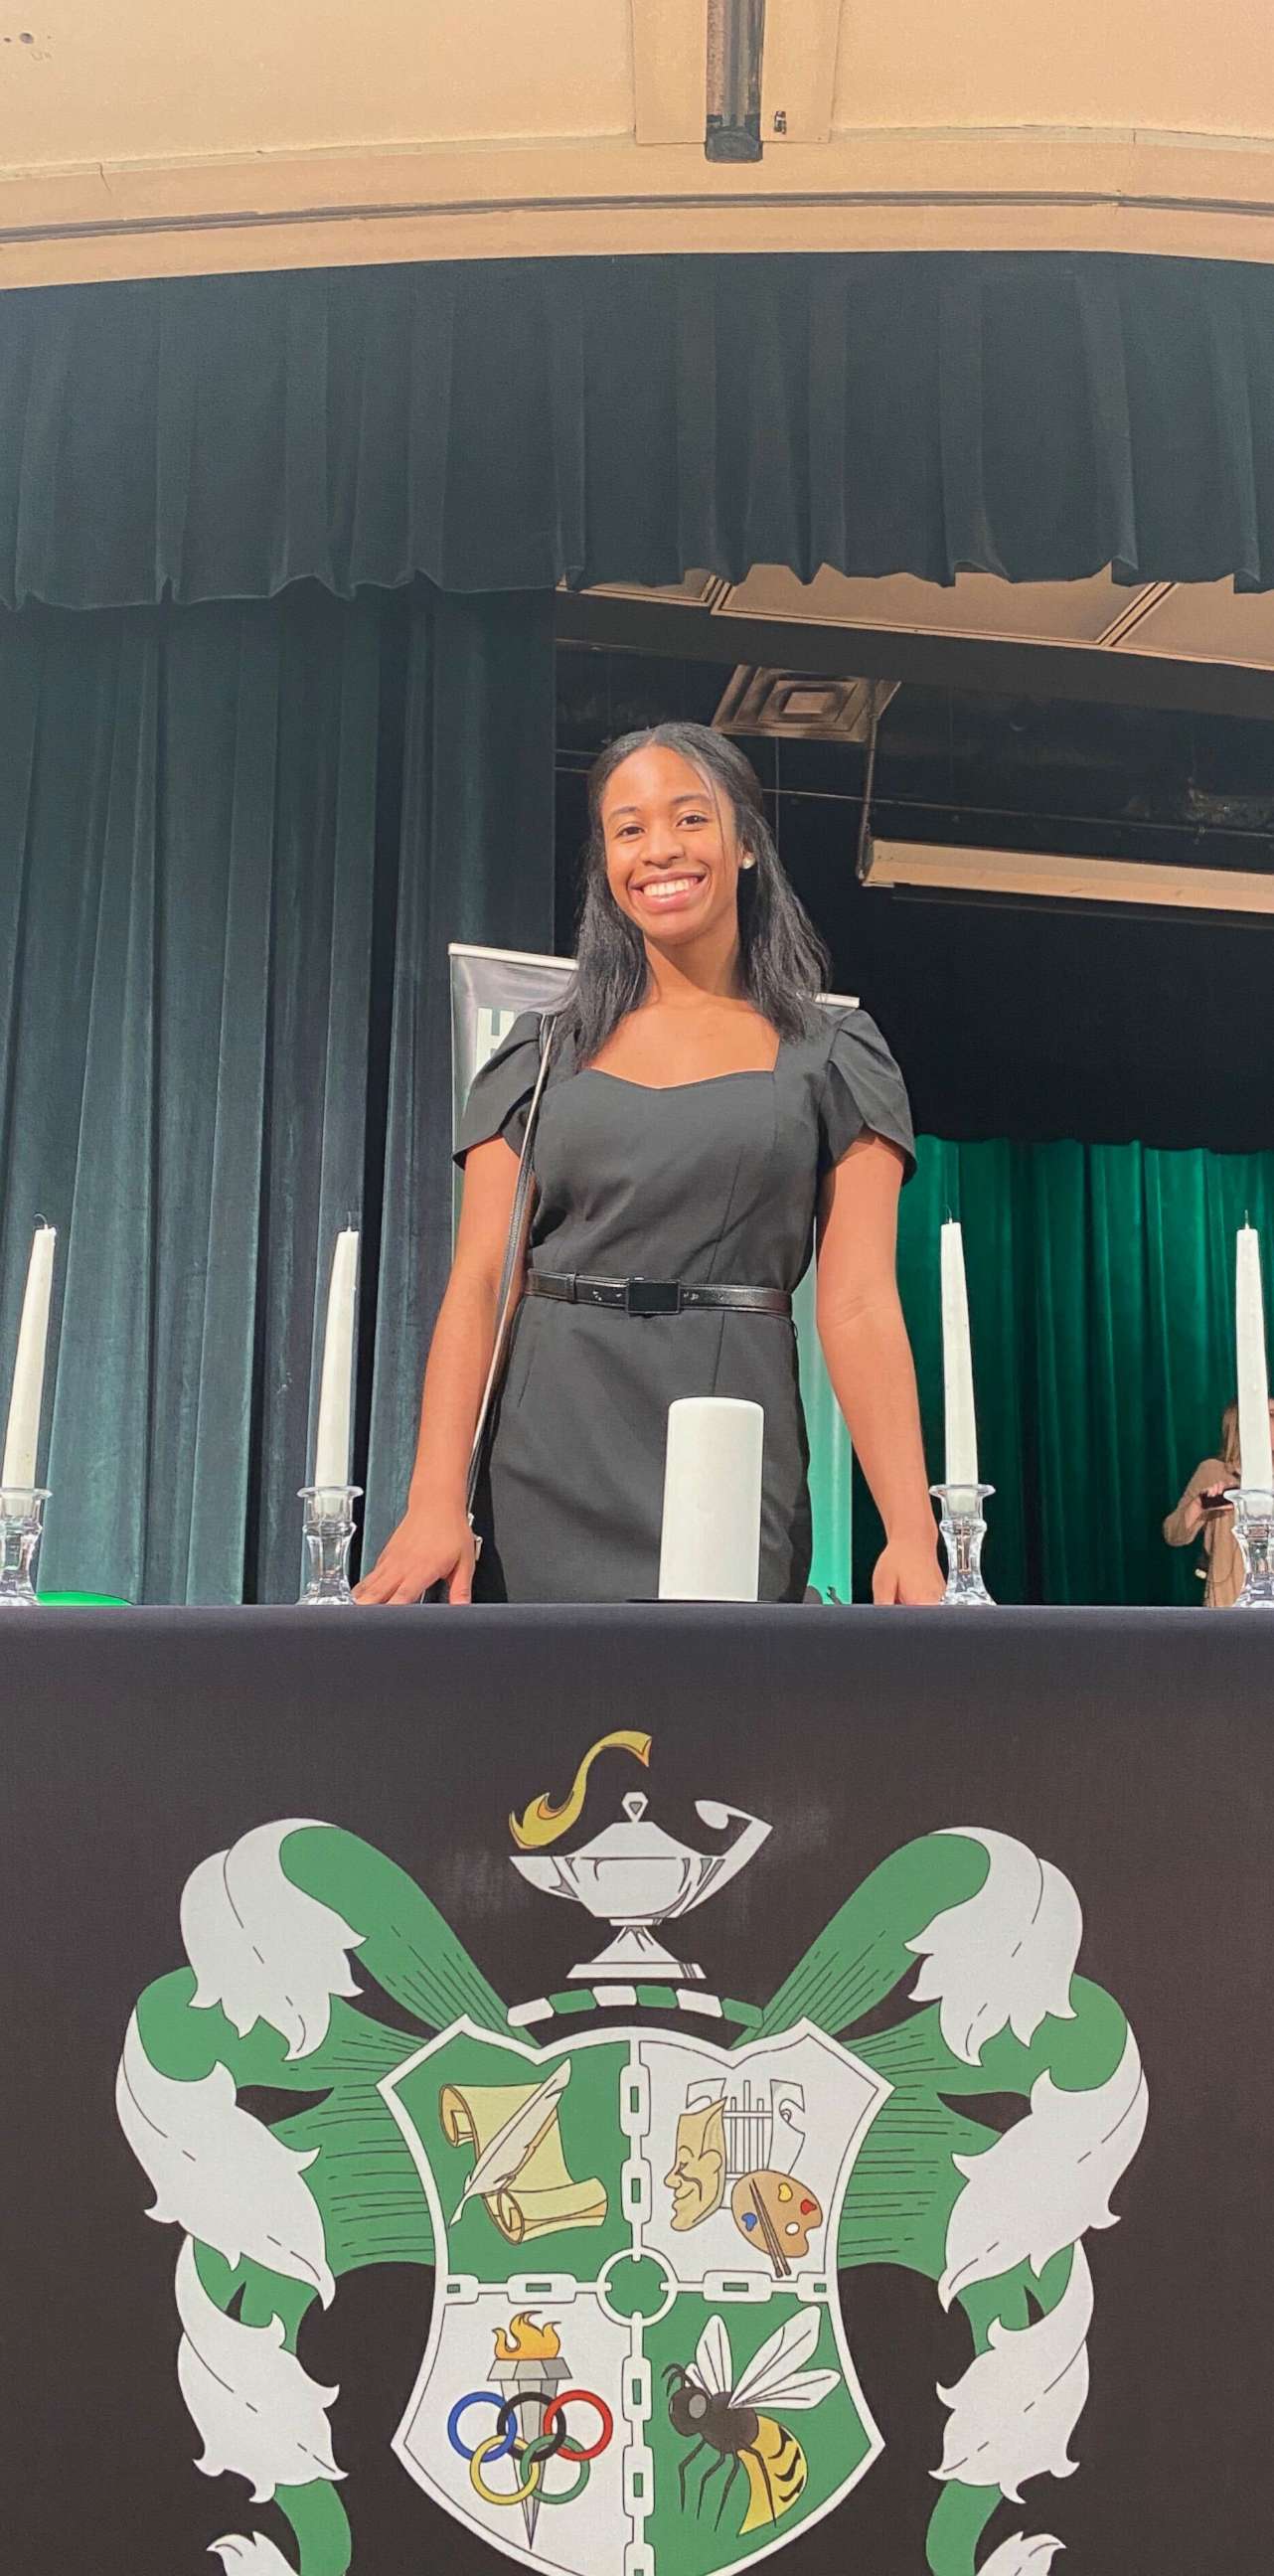 PHOTO: Aria McDaniel, the salutatorian at Haines City High School in Haines City, Florida, will attend the University of Florida to study biology. Her goal is to become a pediatrician.